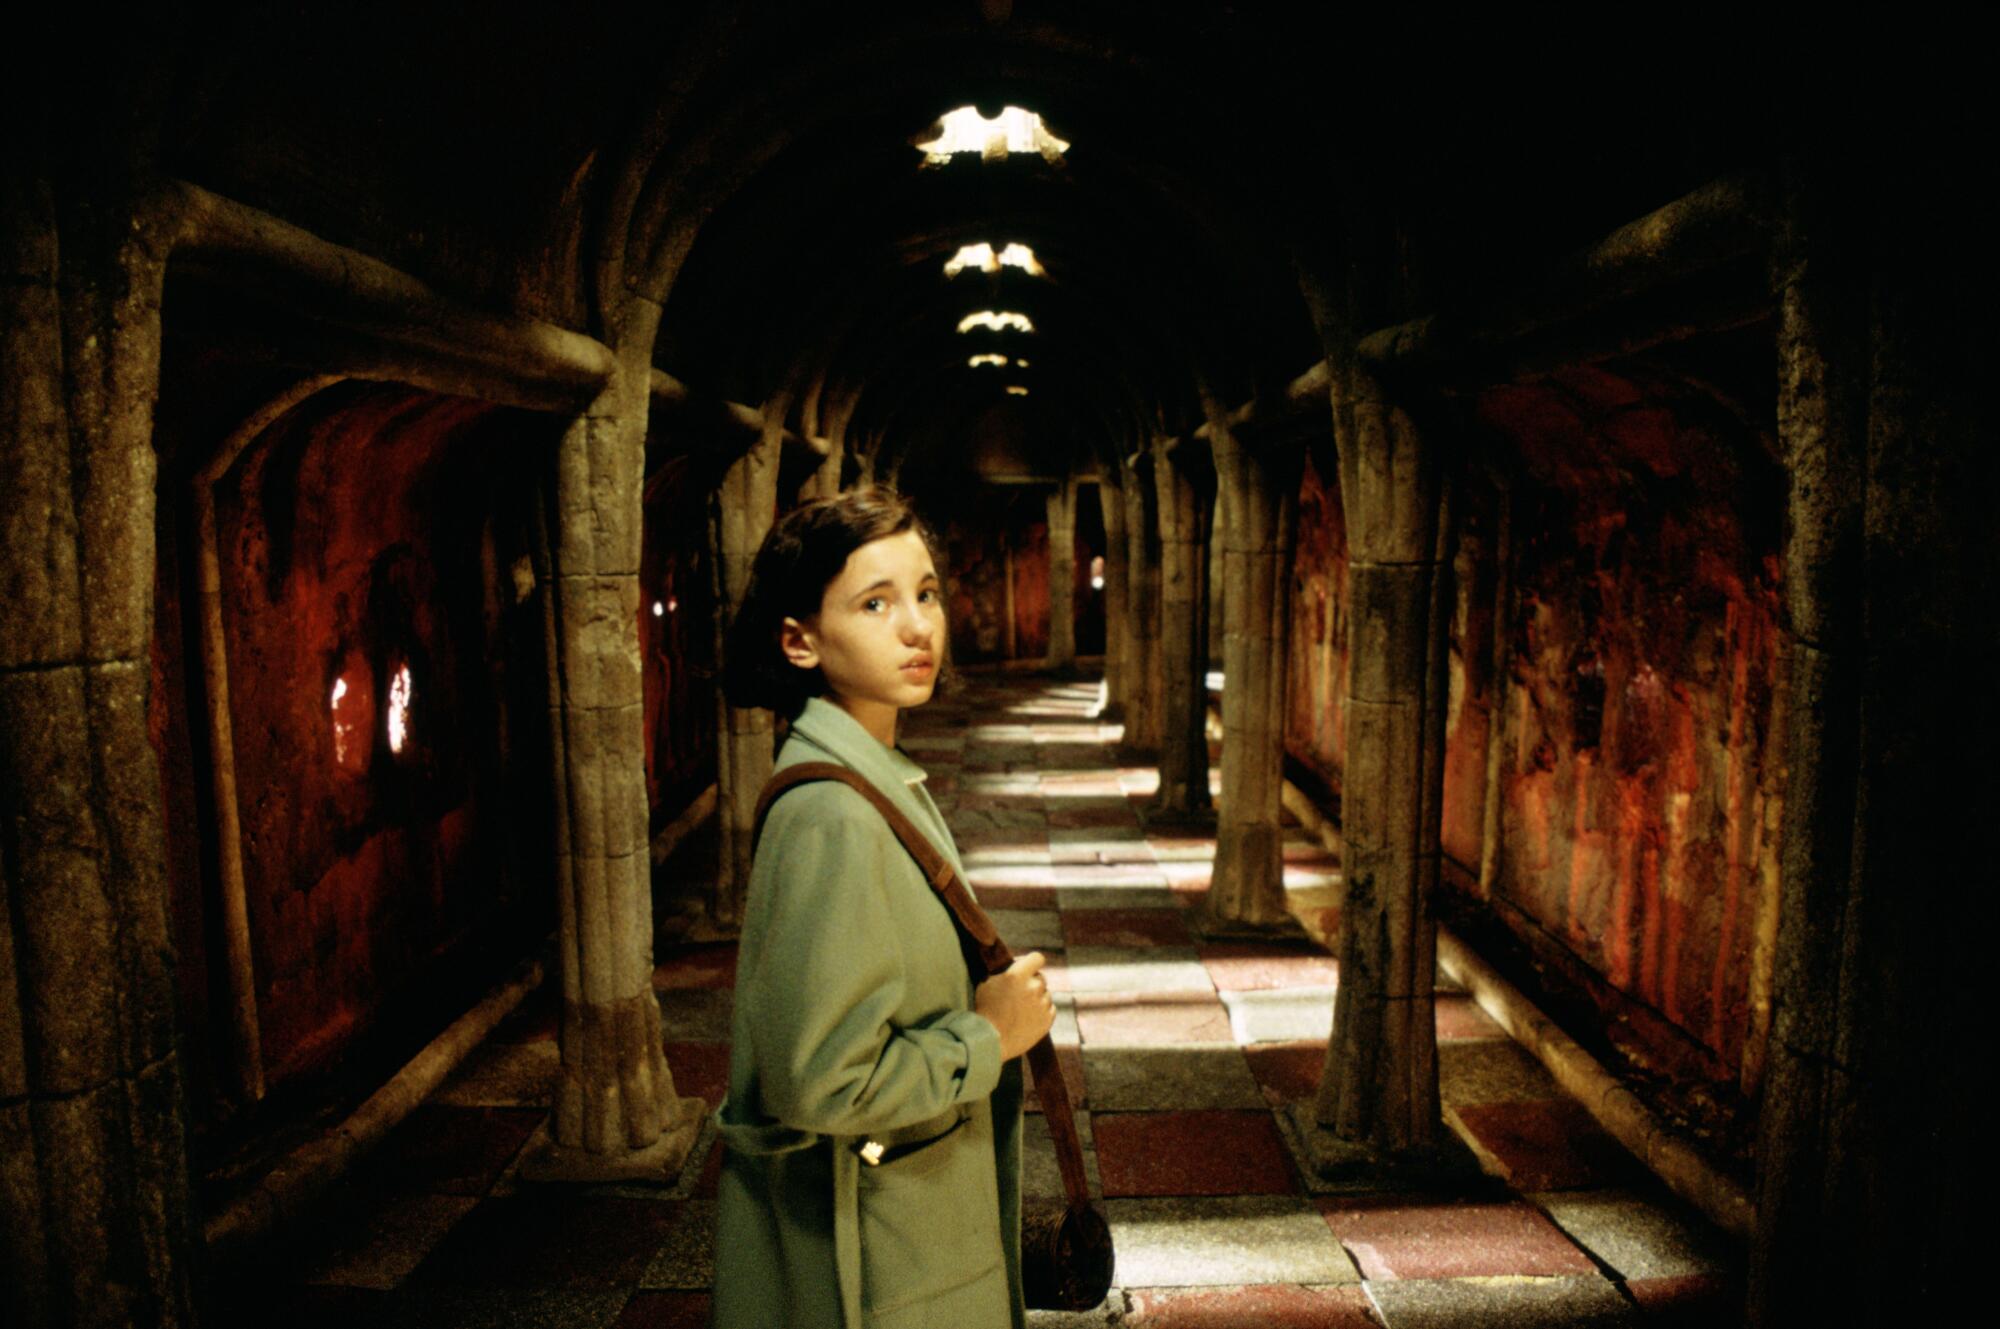 Ivana Baquero in the movie PAN'S LABYRINTH, directed by Guillermo del Toro.